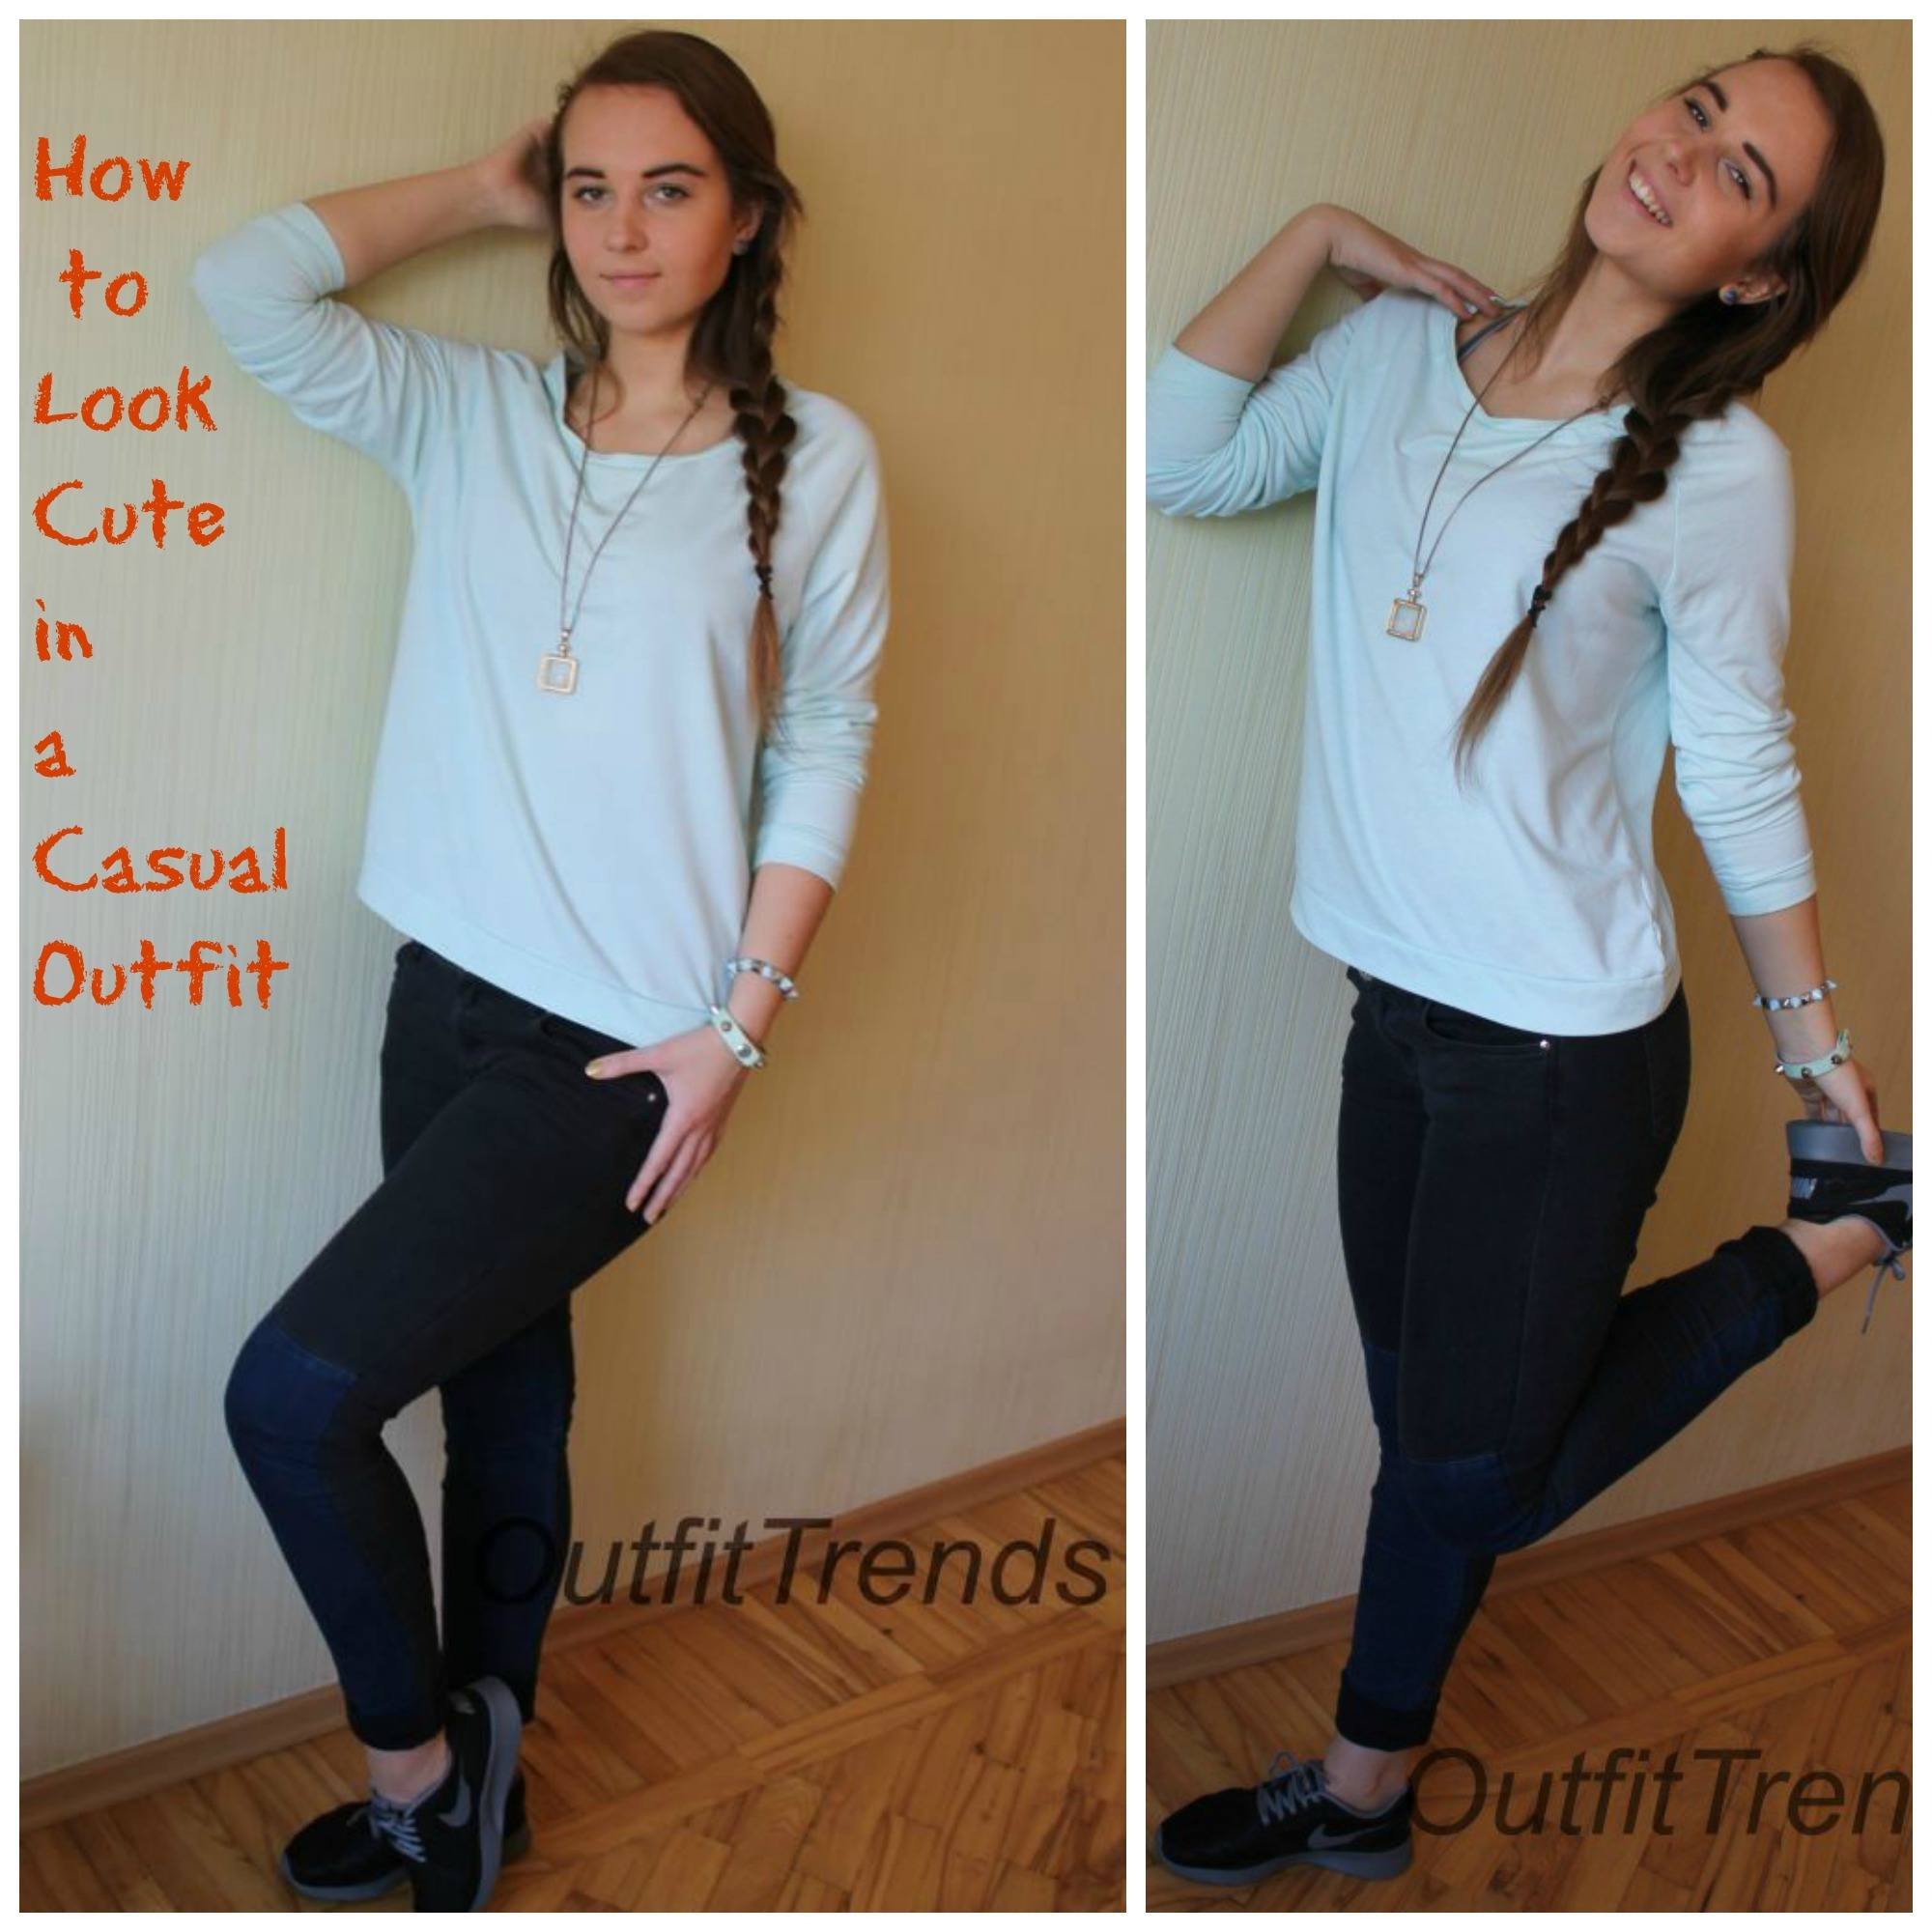 How to Look Cute in a Casual Outfit – Fashion Tips for Teens